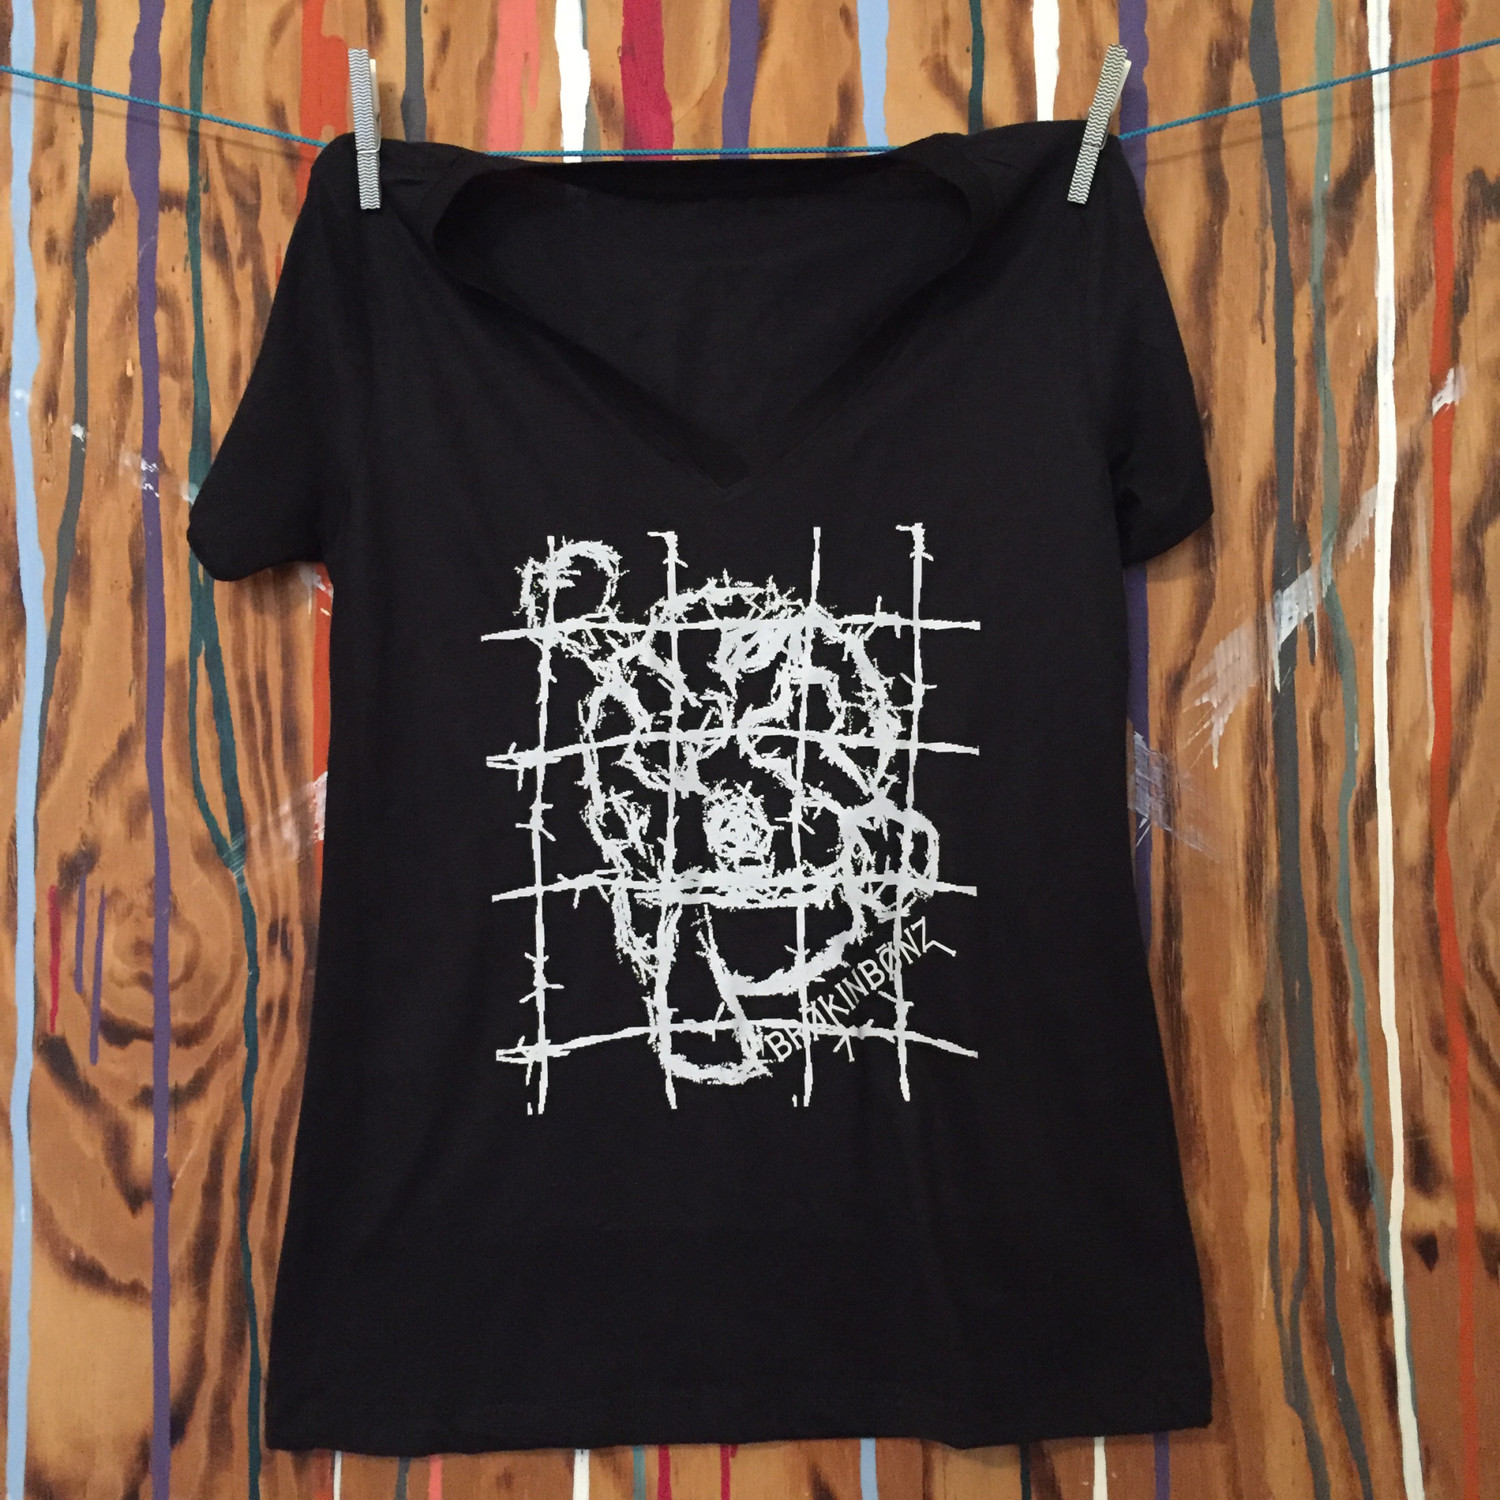 SKETCHY Womens V-Neck...Available with custom fraction